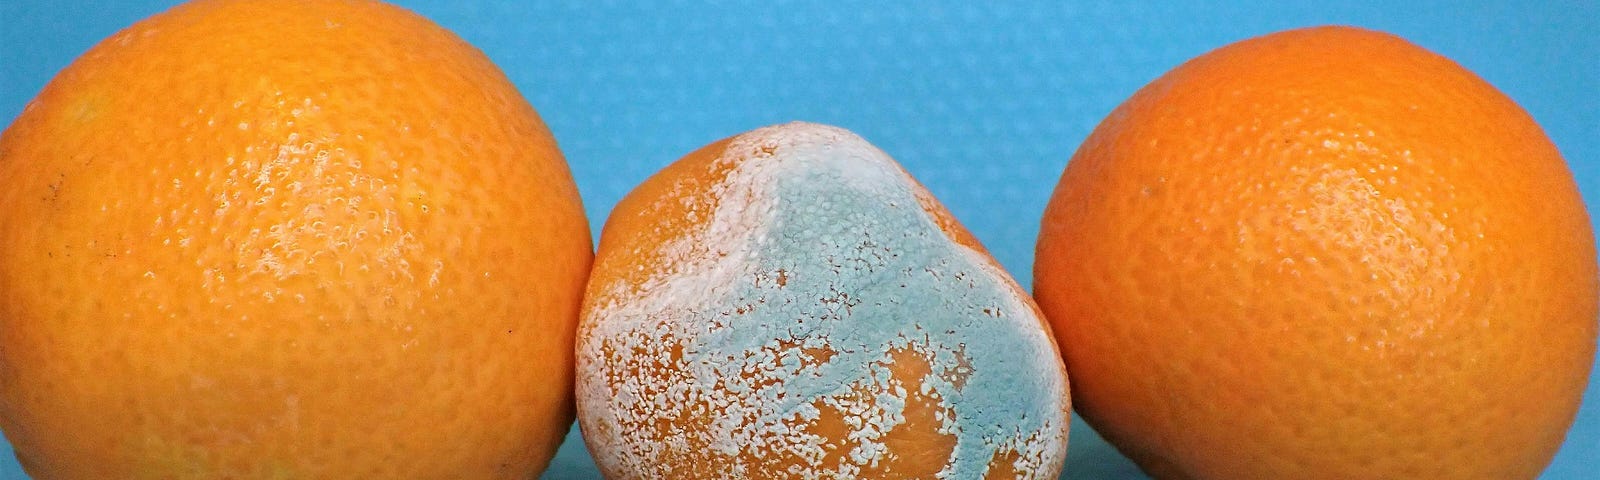 Three oranges against a bright blue background. The middle orange is rotting.